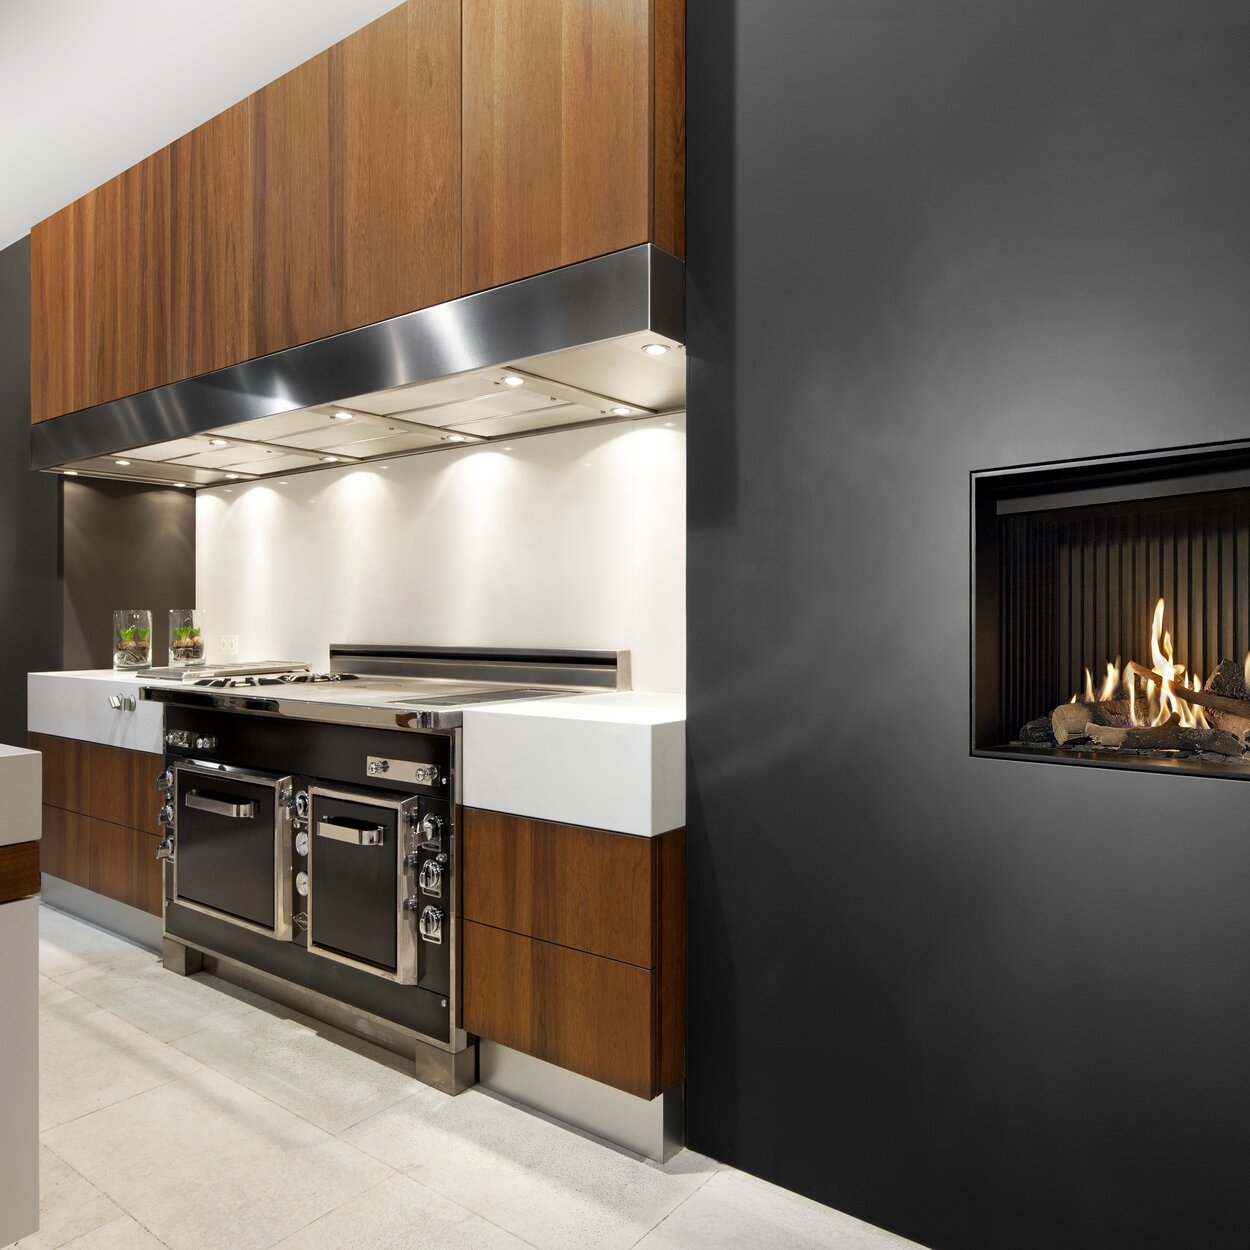 Gas fireplace G60/48F front version built into black wall in the kitchen with wooden elements